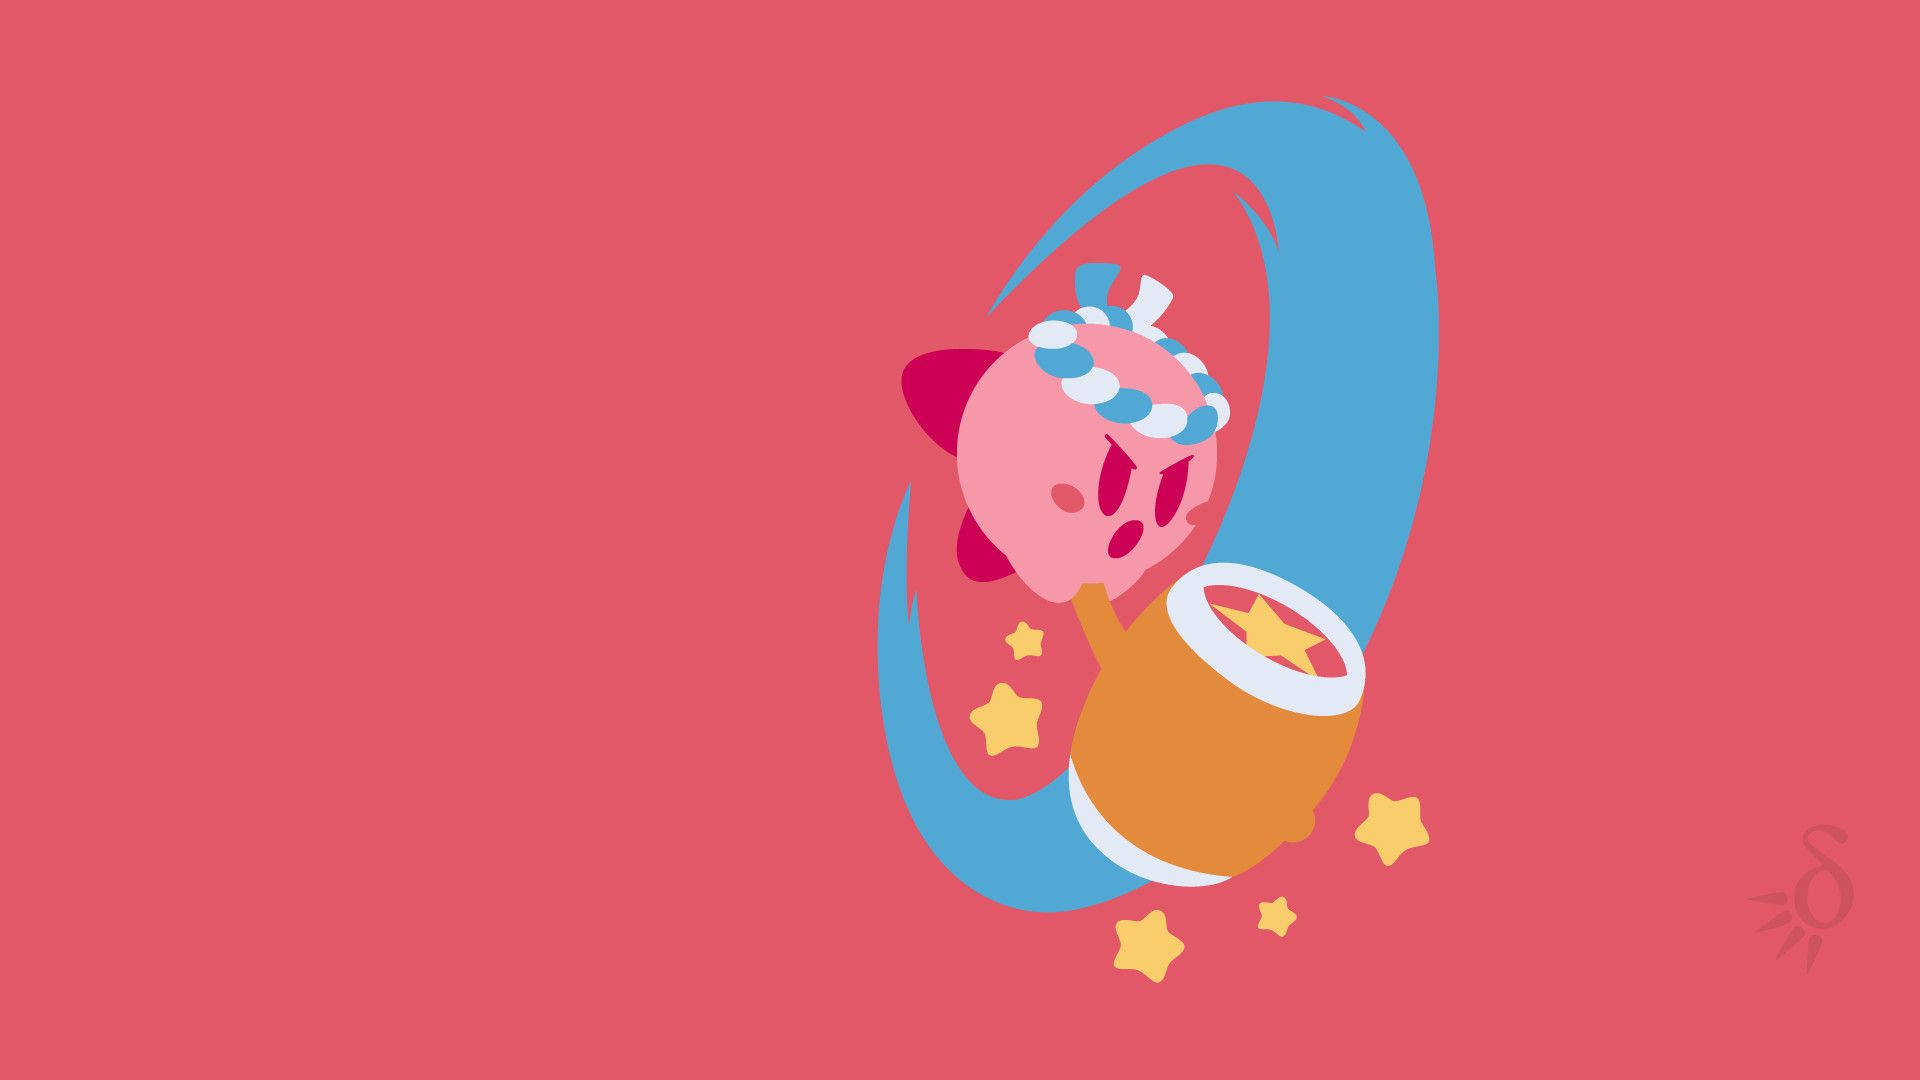 Awesome Pink Aesthetic Kirby Art Wallpaper